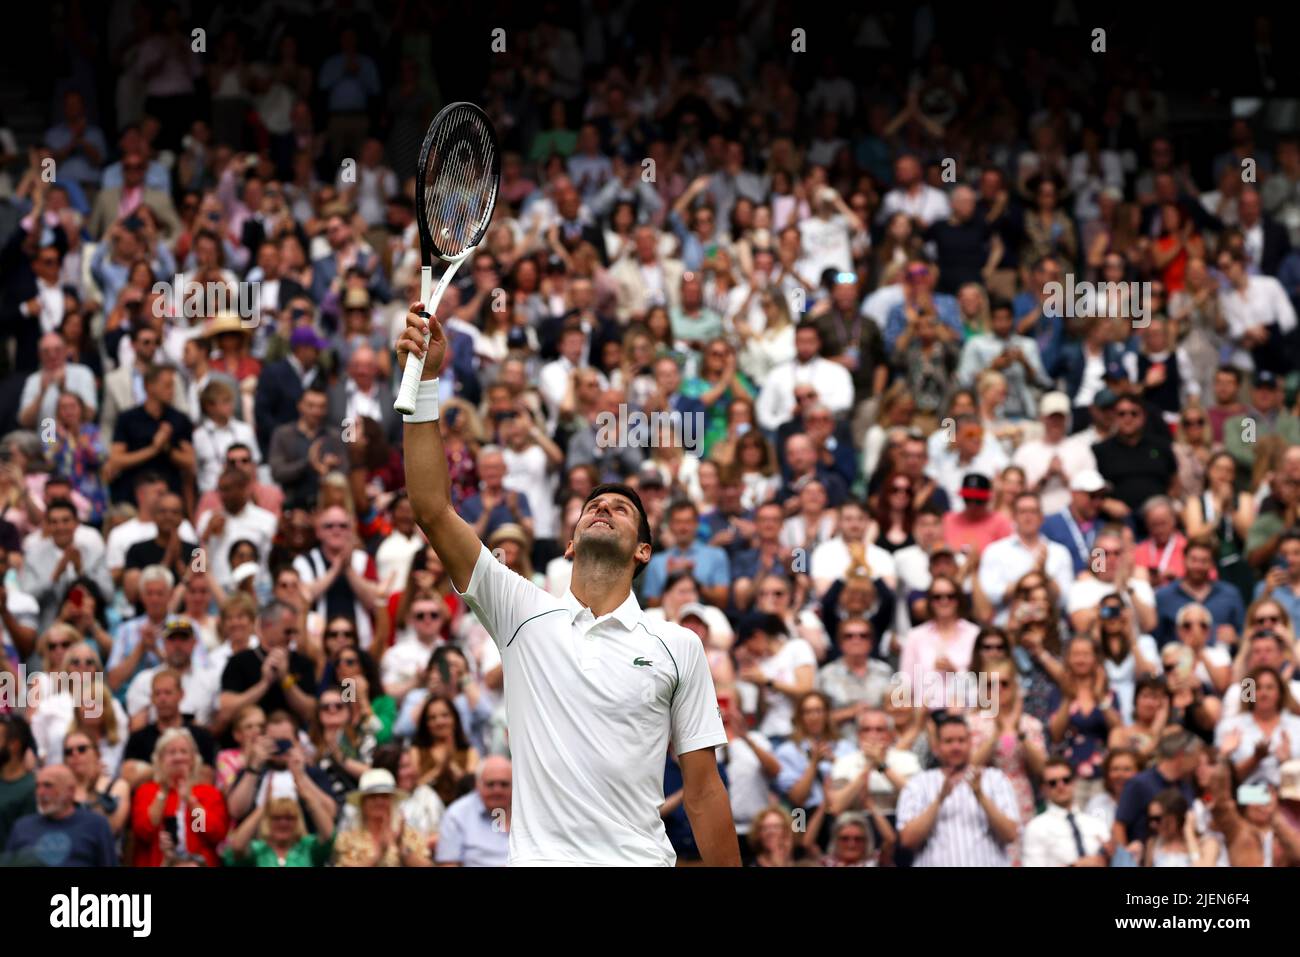 London, 27 June 2022 - Number one seed Novak Acknowledges the crowd following his opening round victory against Soon Woo Koon on Centre Court at Wimbledon. Credit: Adam Stoltman/Alamy Live News Stock Photo